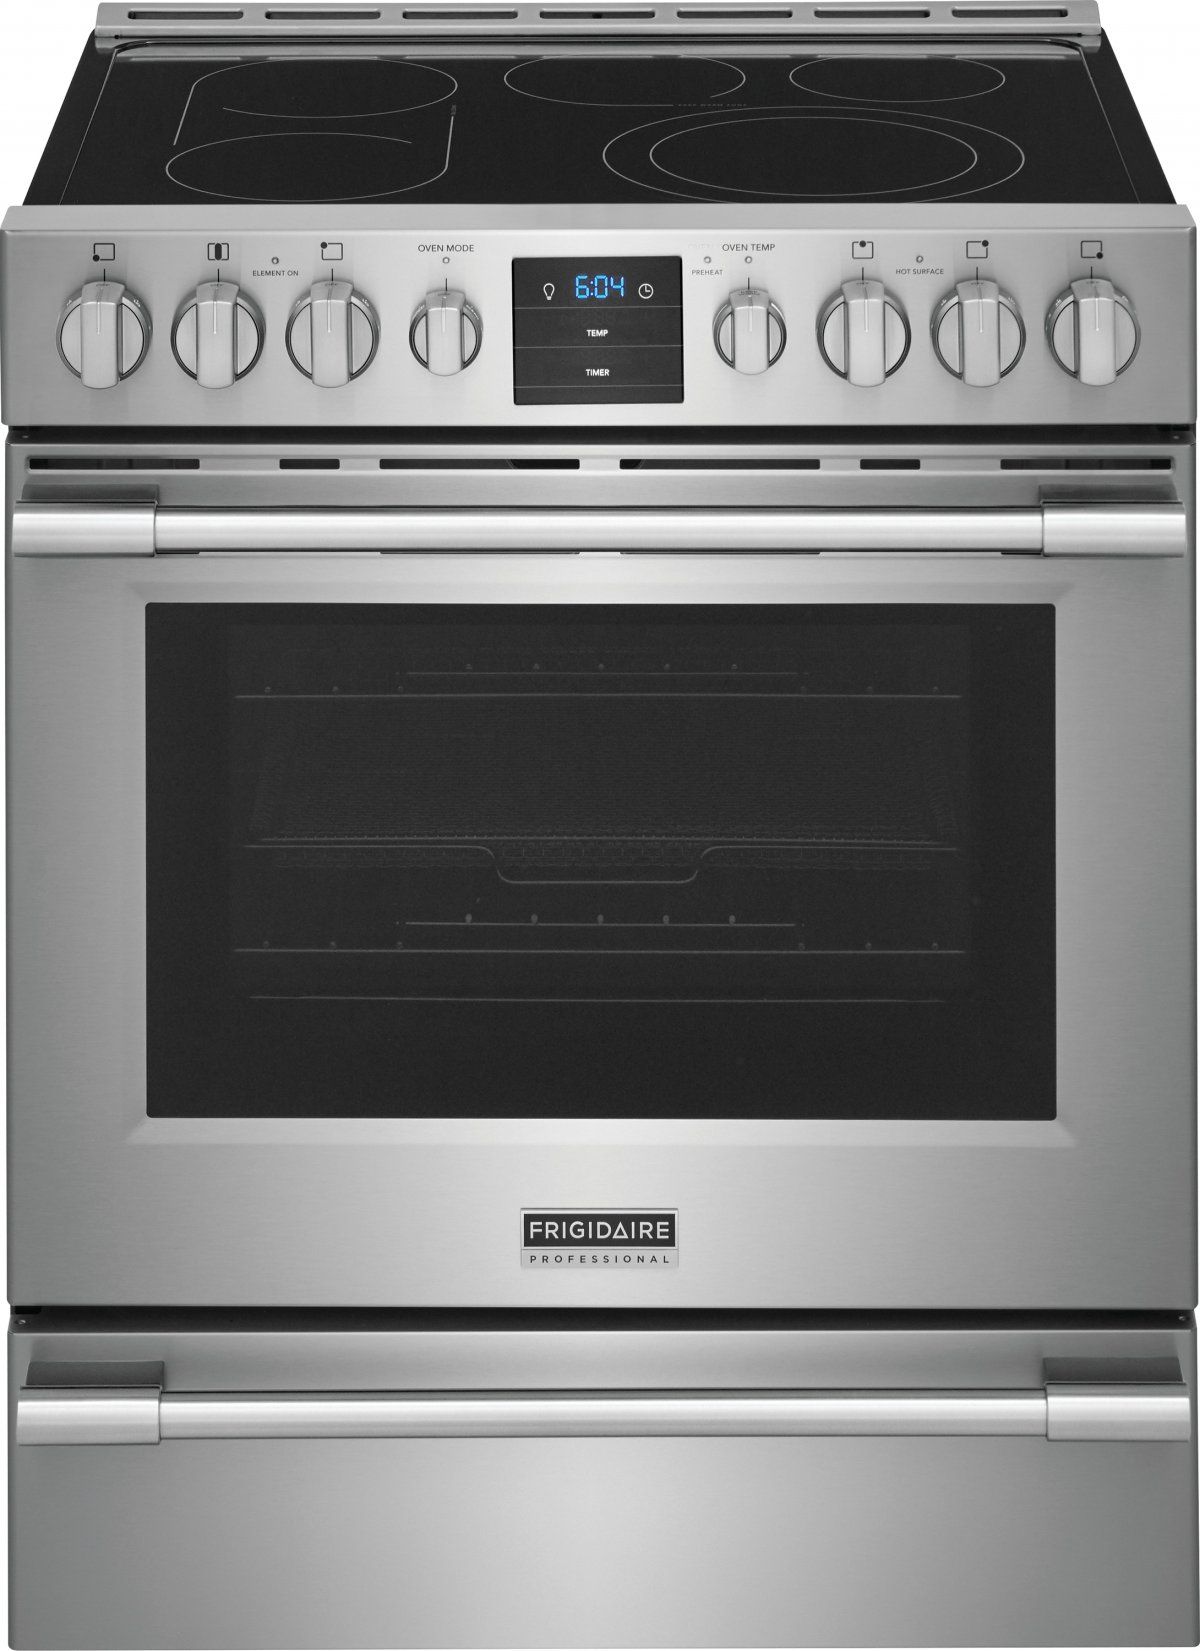 Frigidaire Professional® 30" Stainless Steel Front Control Freestanding Air Fry Electric Range